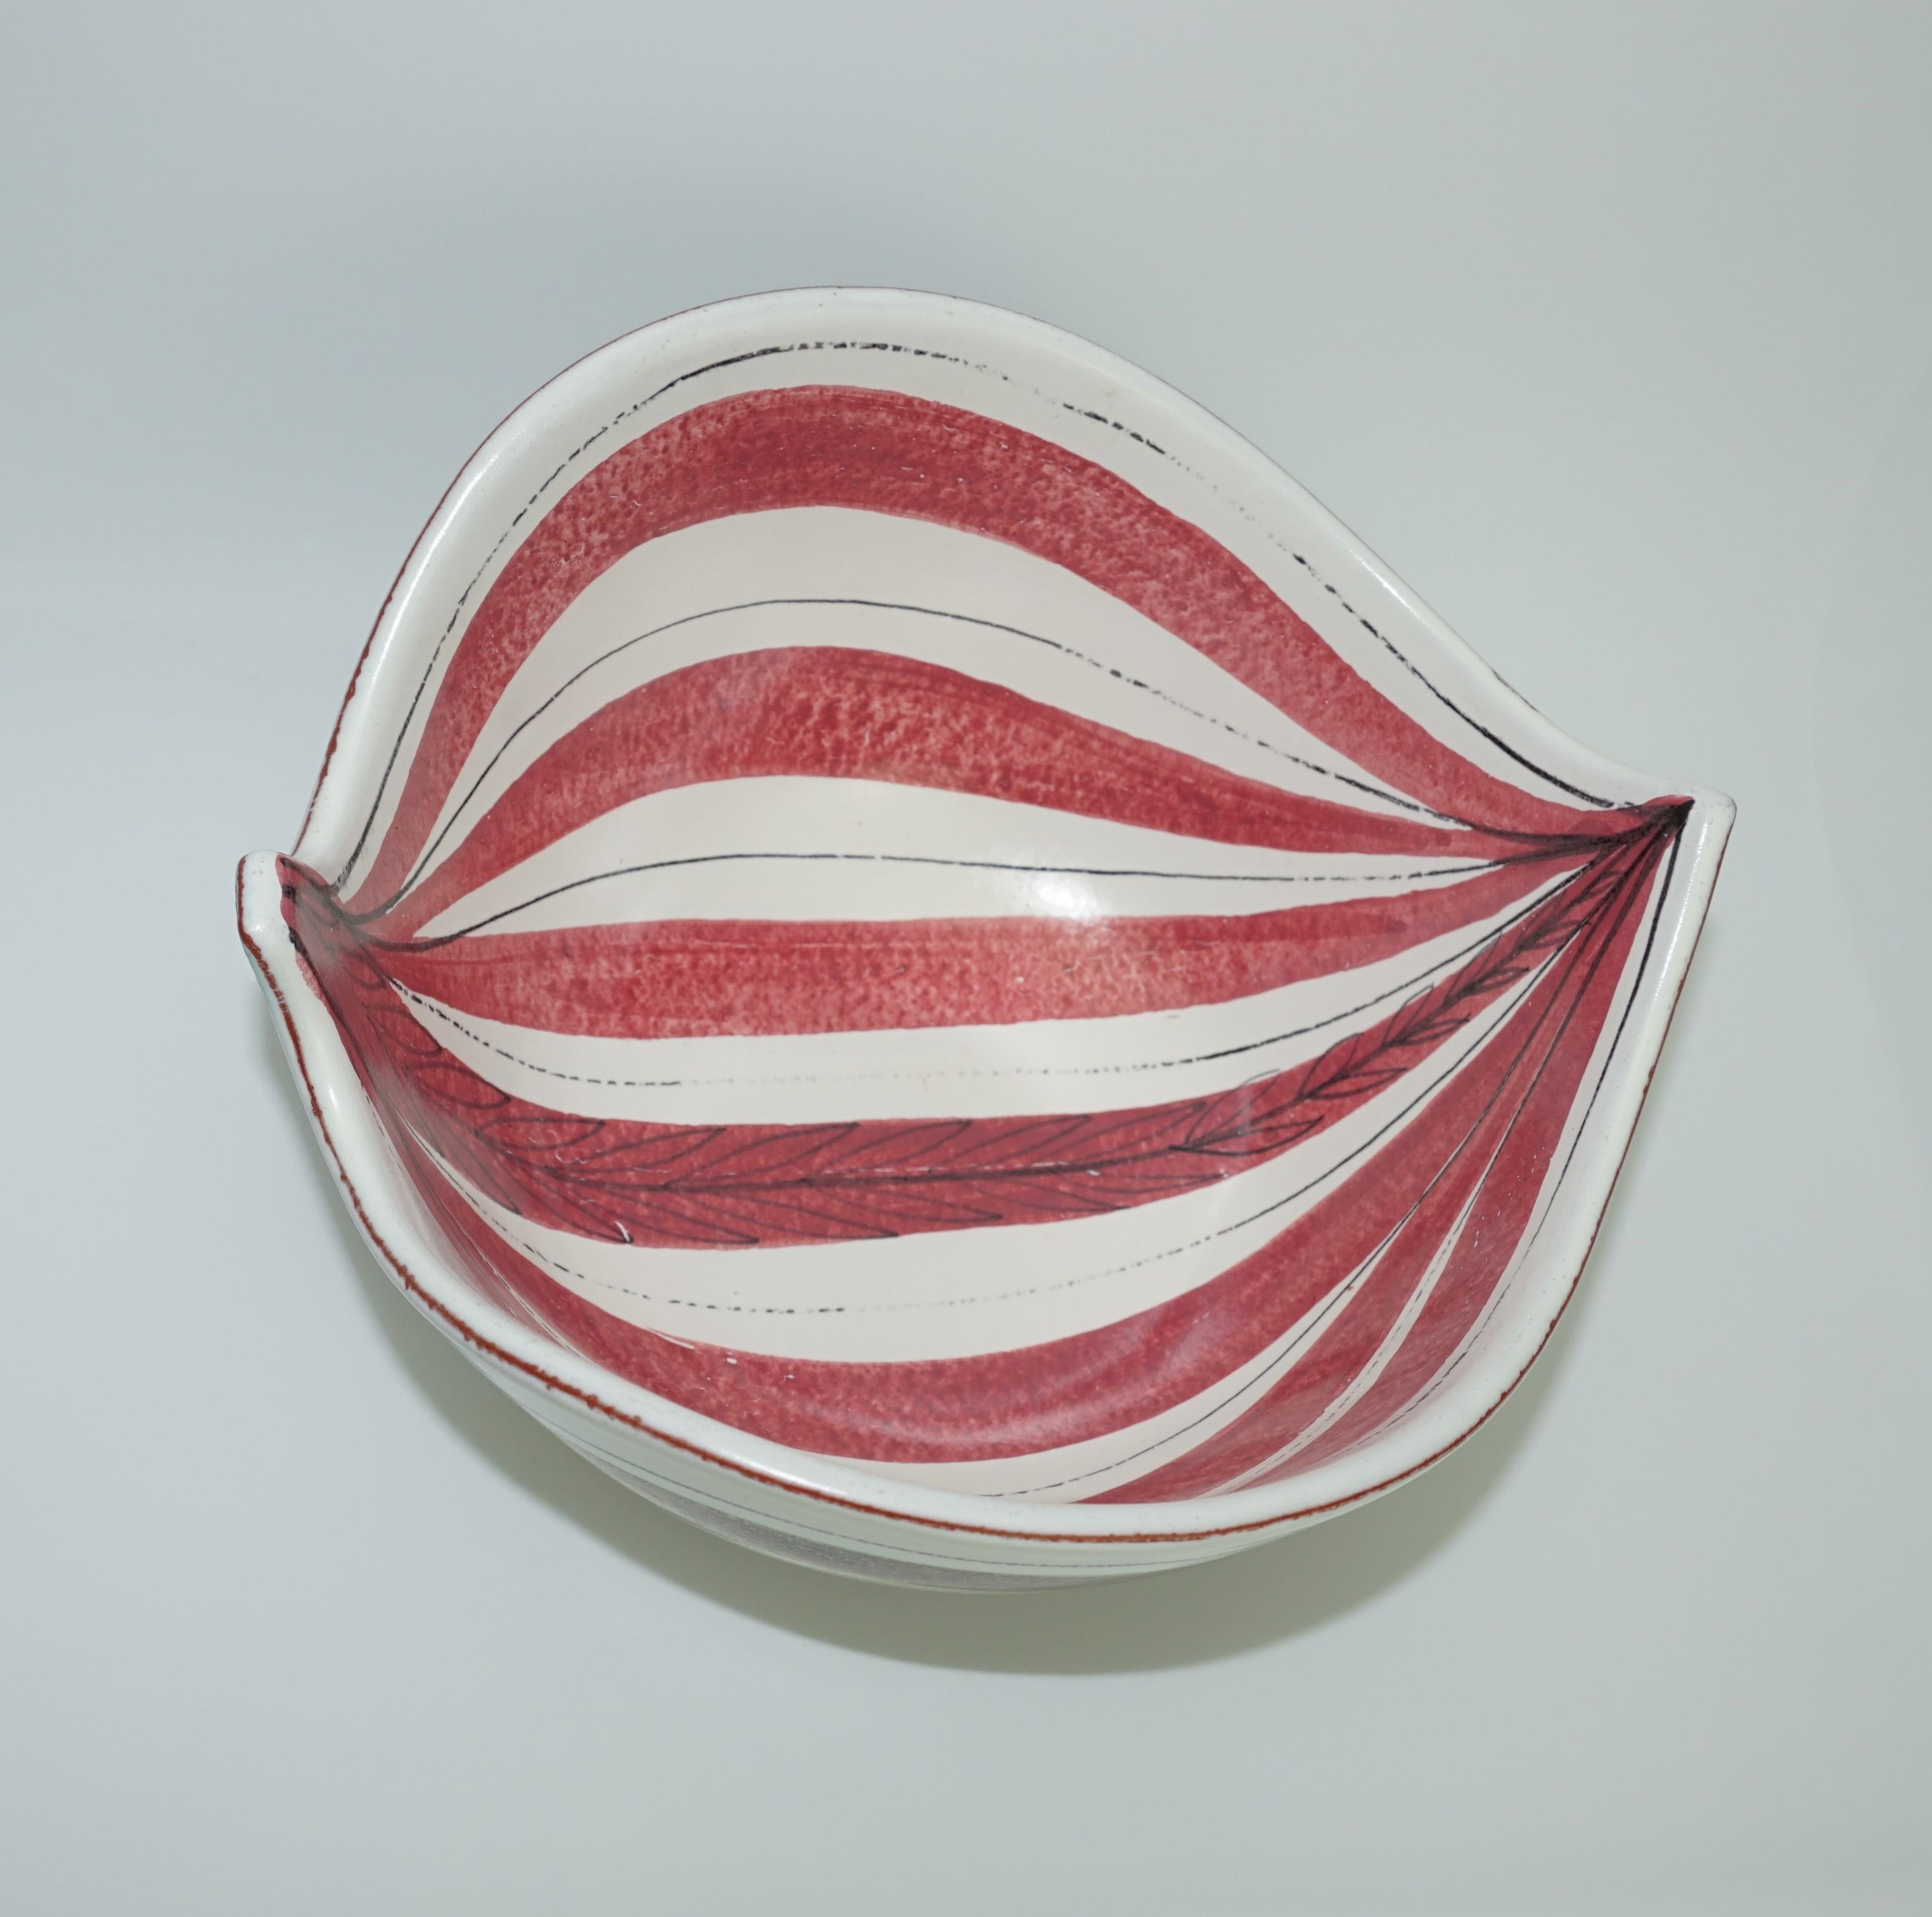 Ceramic bowl by Stig Lindberg, Sweden, circa 1950. Beautiful red, green and white colors. It is a very decorative bowl looking like an apple. The technique is faience.
Very good condition.
We have two more bowls. Let us know if you are interested